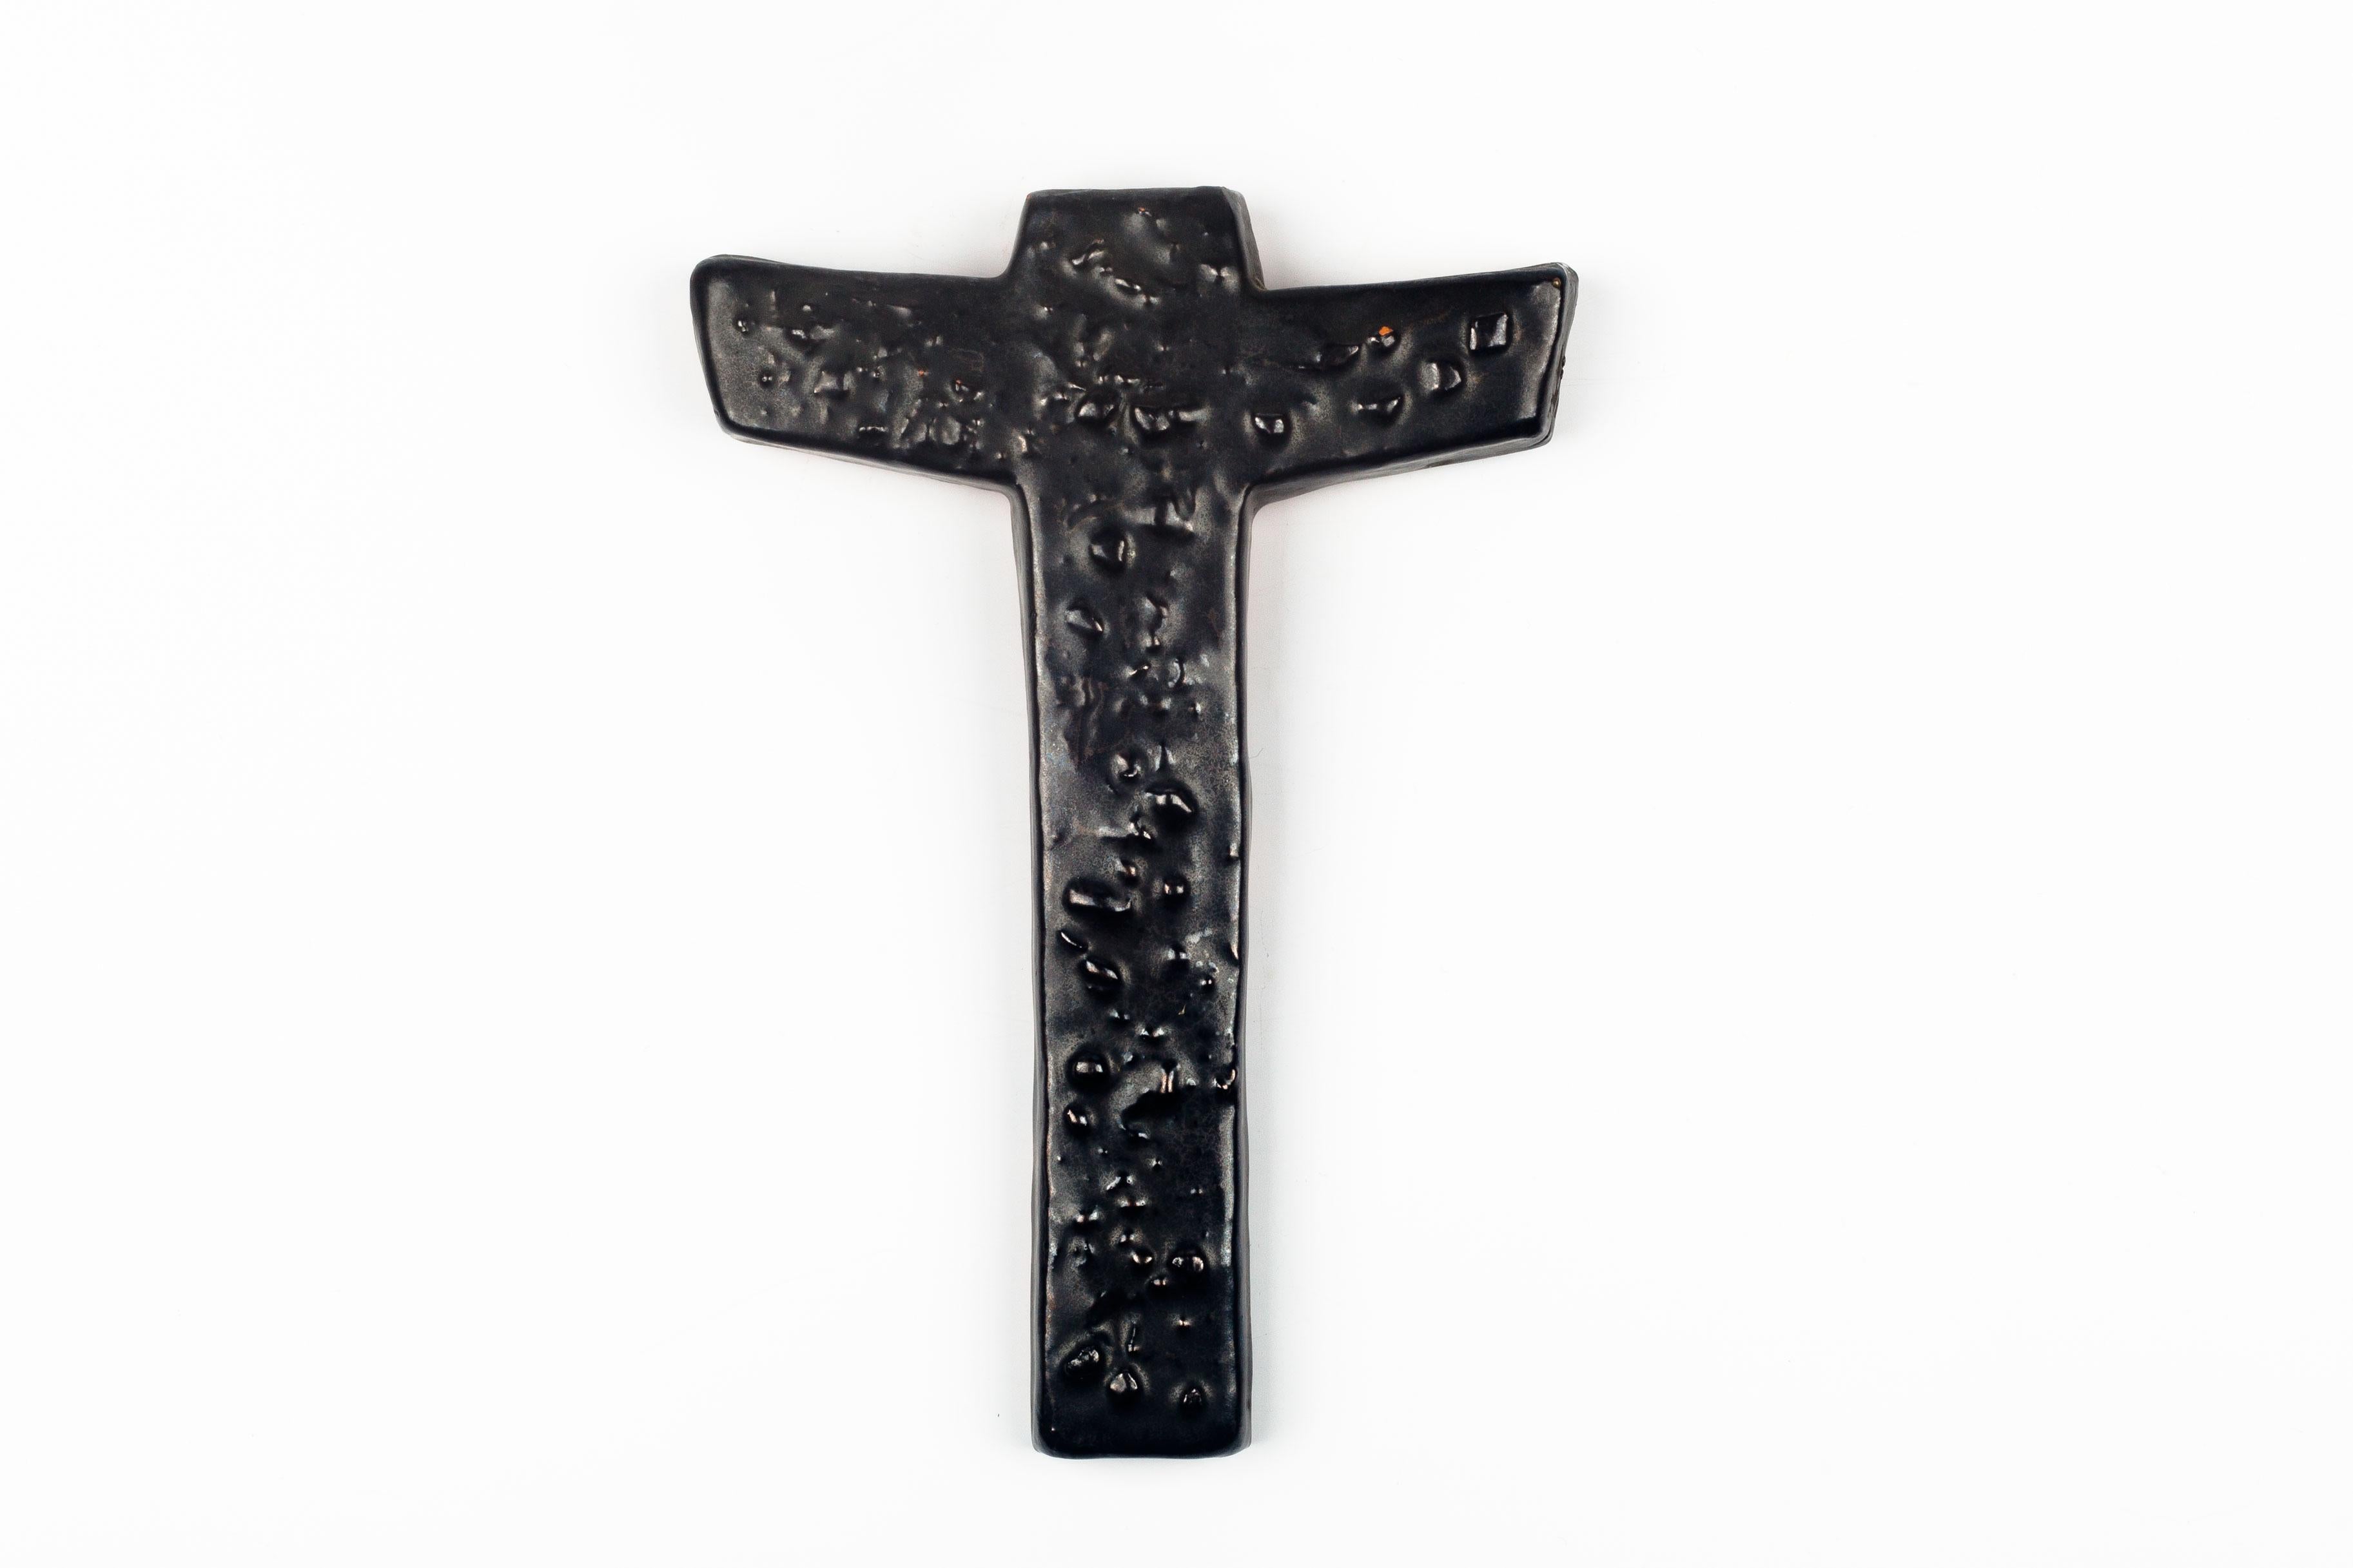 Crucifix in slightly metallic glazed black ceramic with texture. Handmade made in Belgium in the 1970s. Chip top front right and left. See photo. 

Dimensions

H 6 in. x W 4.13 in. x D 0.5 in.

H 15.24 cm x W 10.5 cm x D 1.27 cm

This piece